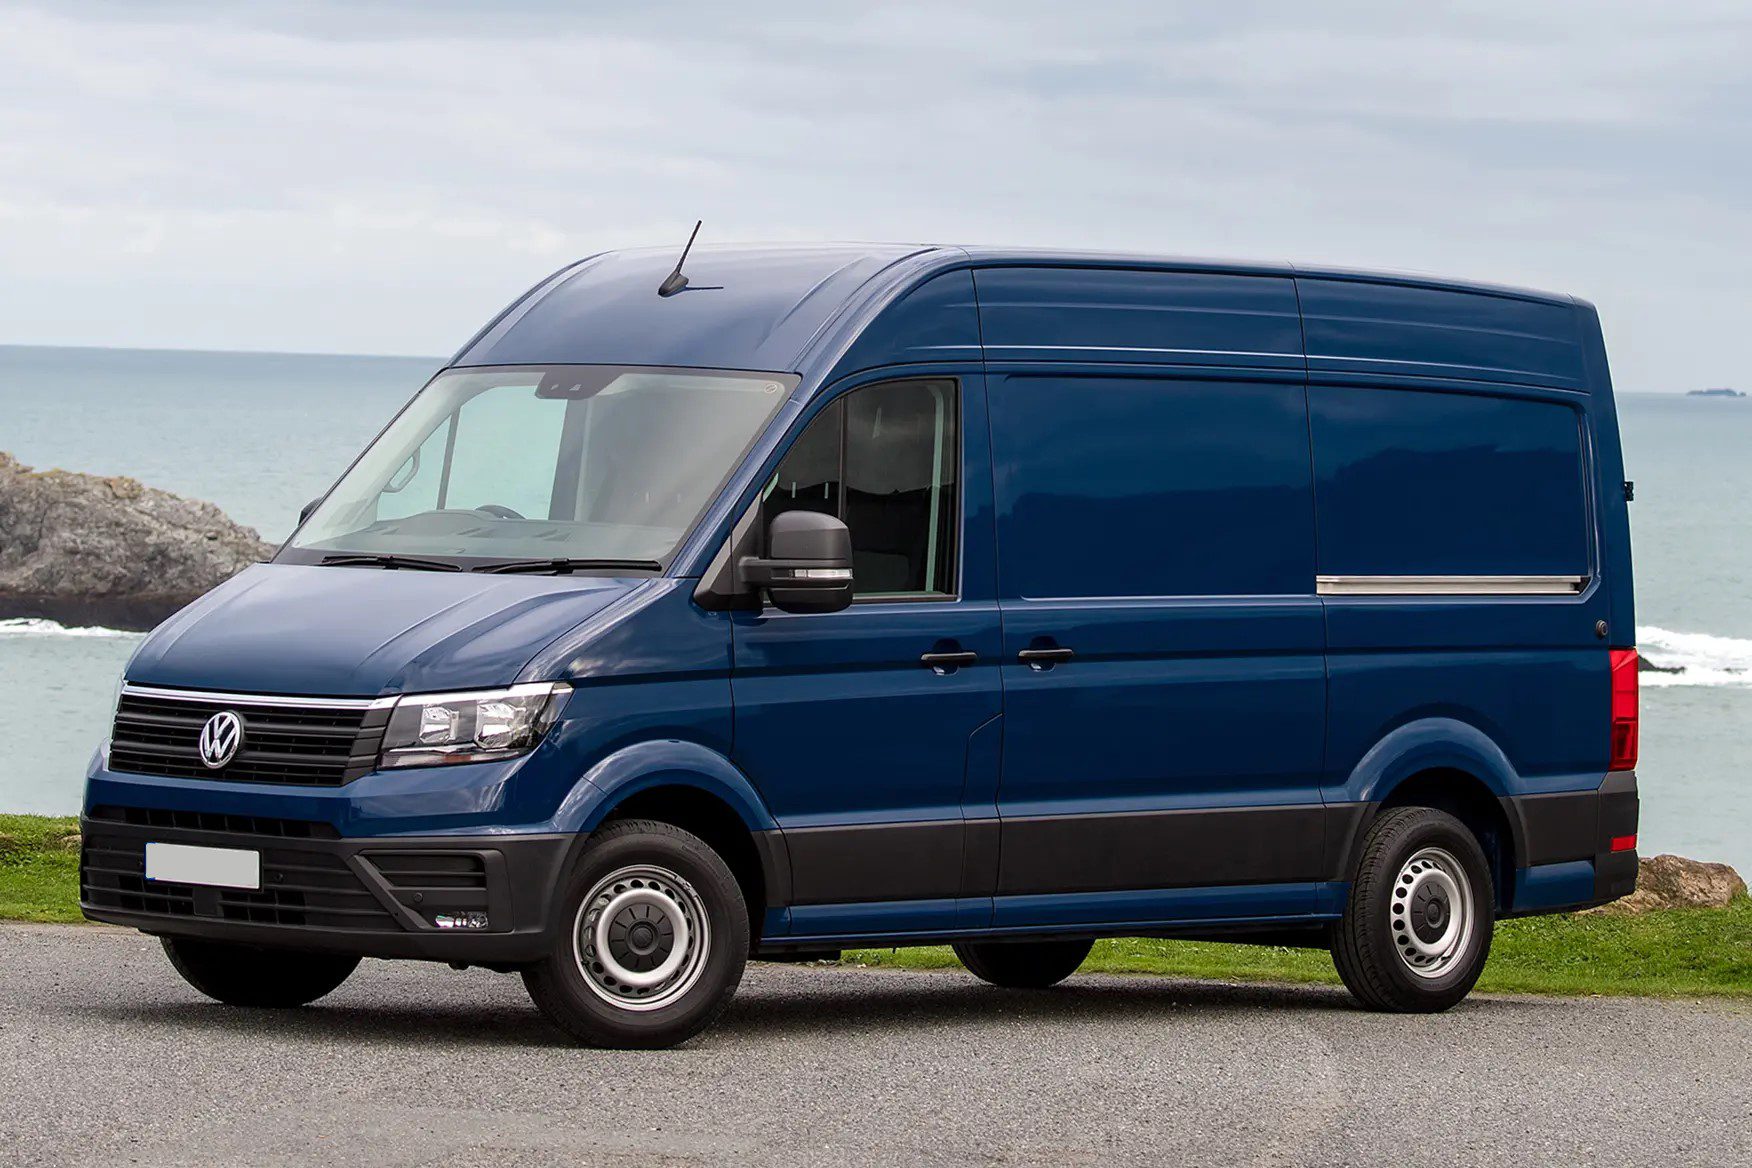 Volkswagen Crafter pros and cons